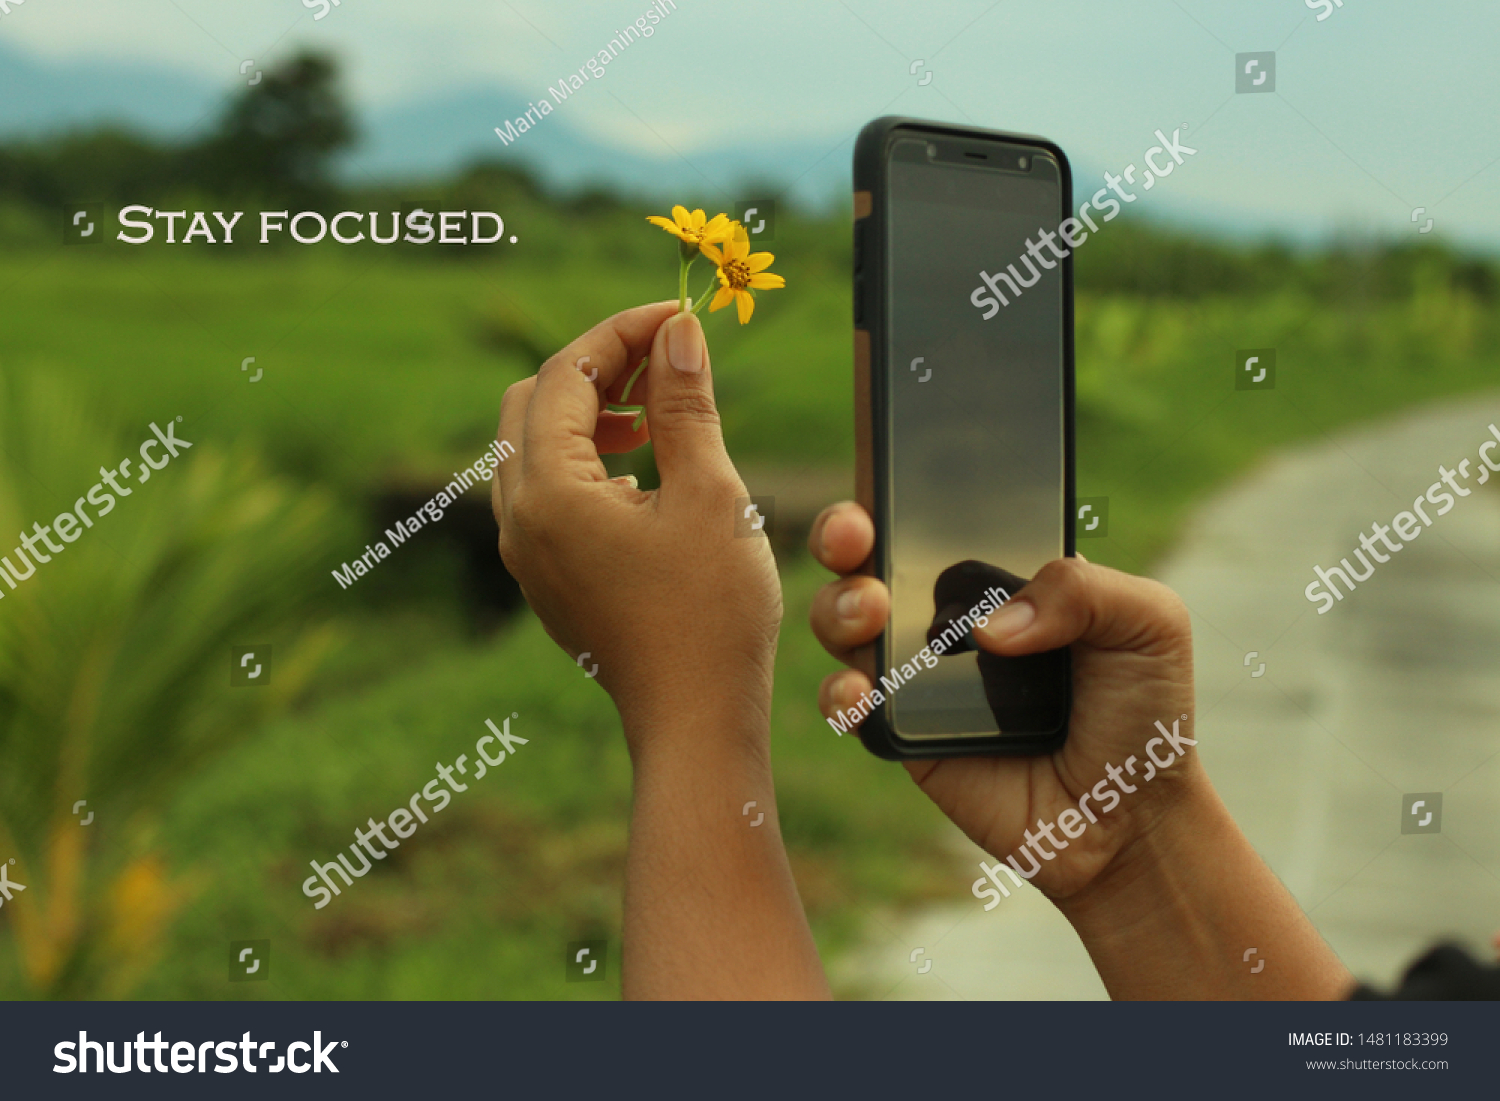 Inspirational motivational quote - Stay focused. With one human hand holds little yellow flowers and the other hand holds a smartphone. Hand phone photographer in life focus concept. #1481183399